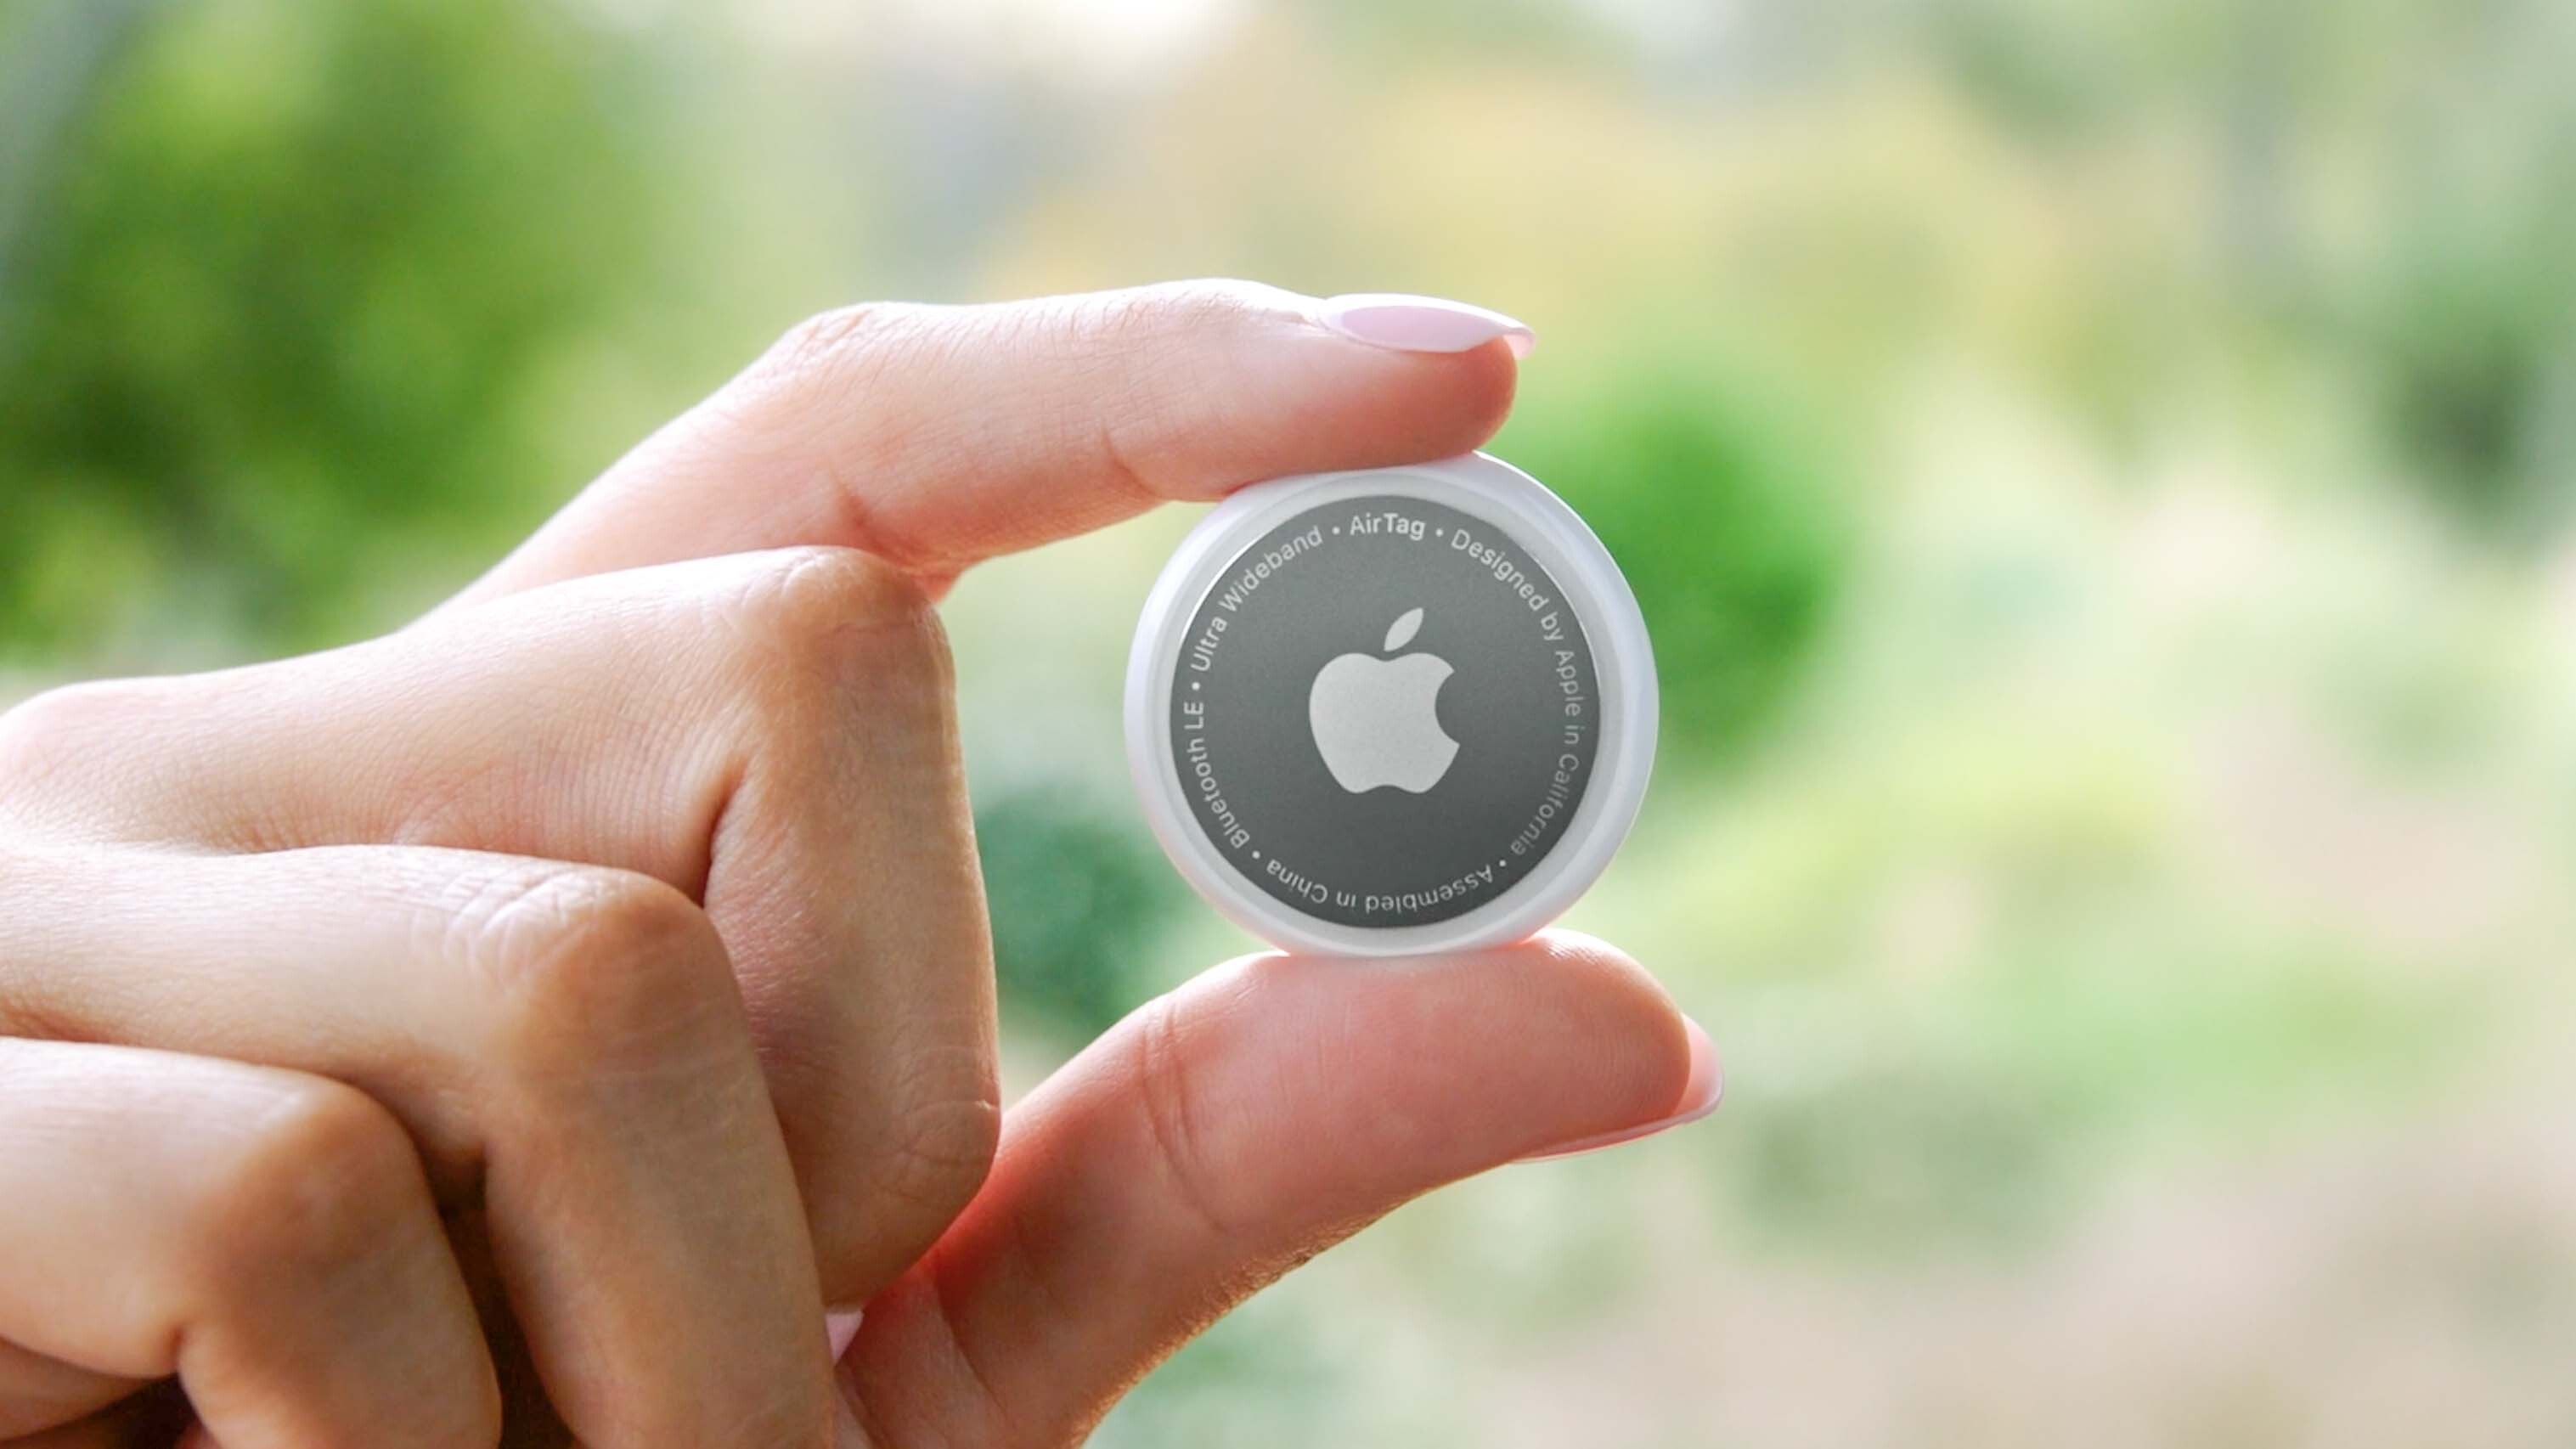 An Apple AirTag, held between a user's fingers in front of a blurred green background